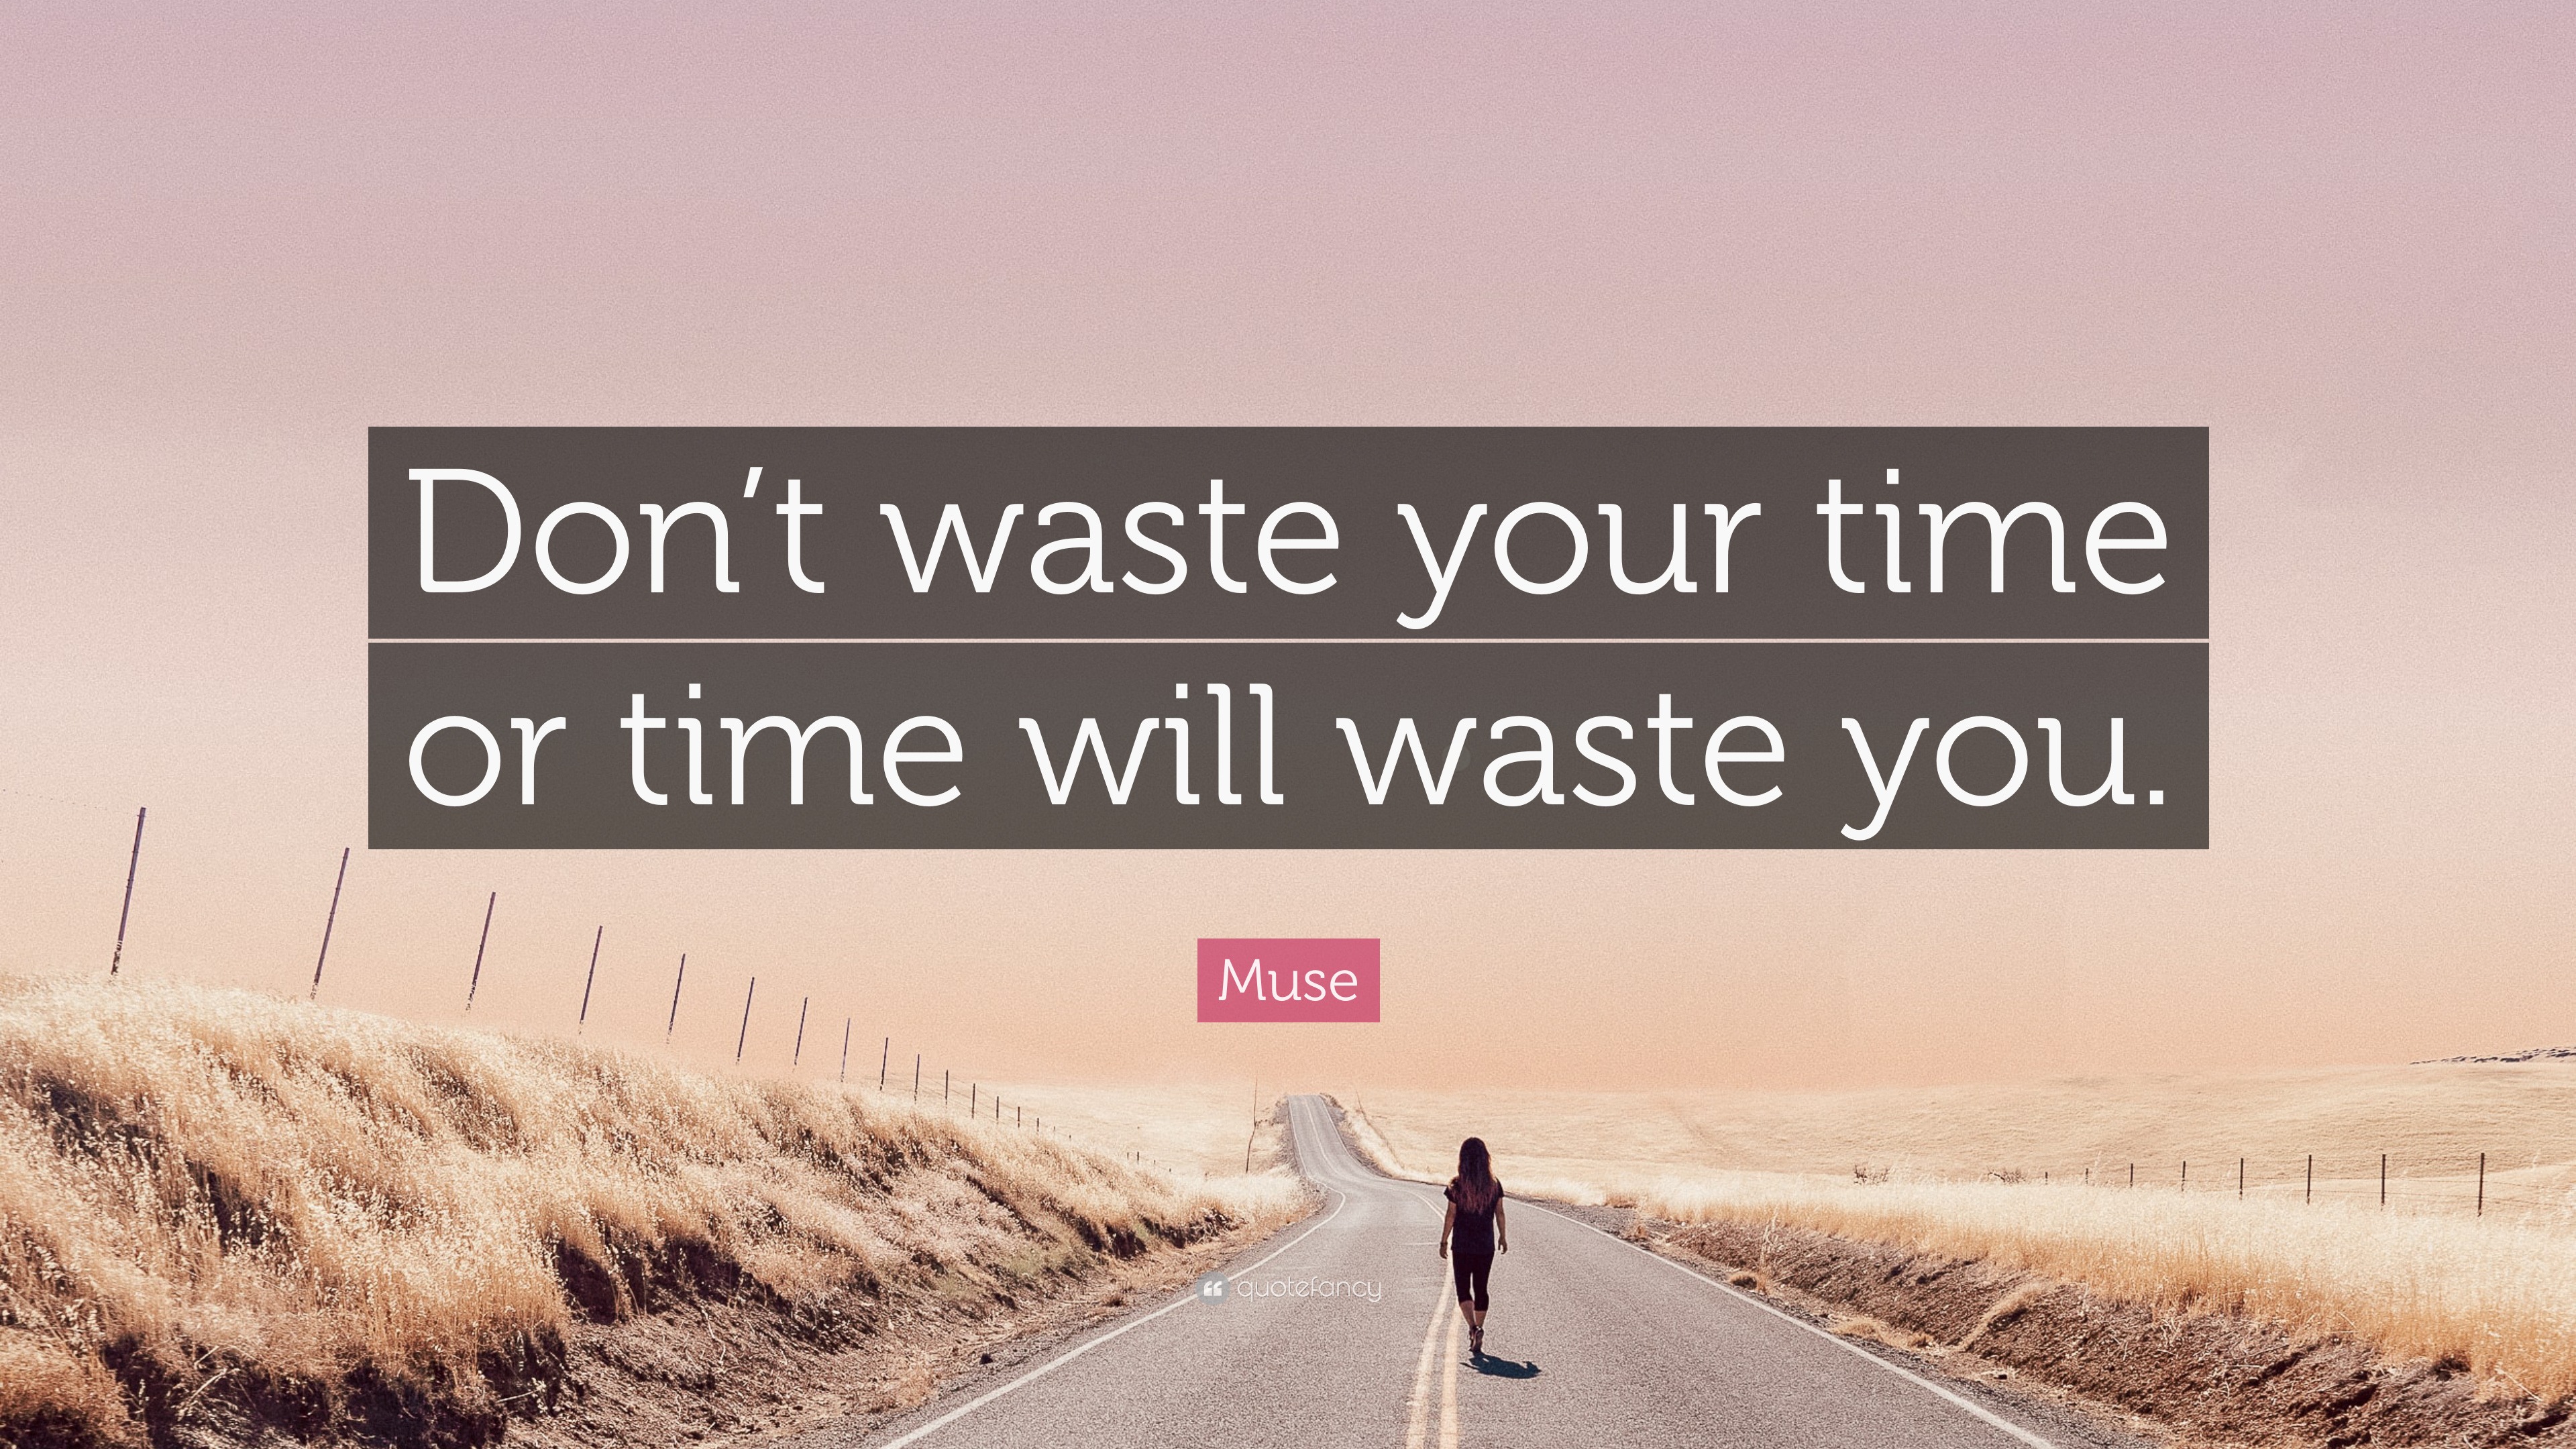 Muse Quote: "Don't waste your time or time will waste you."